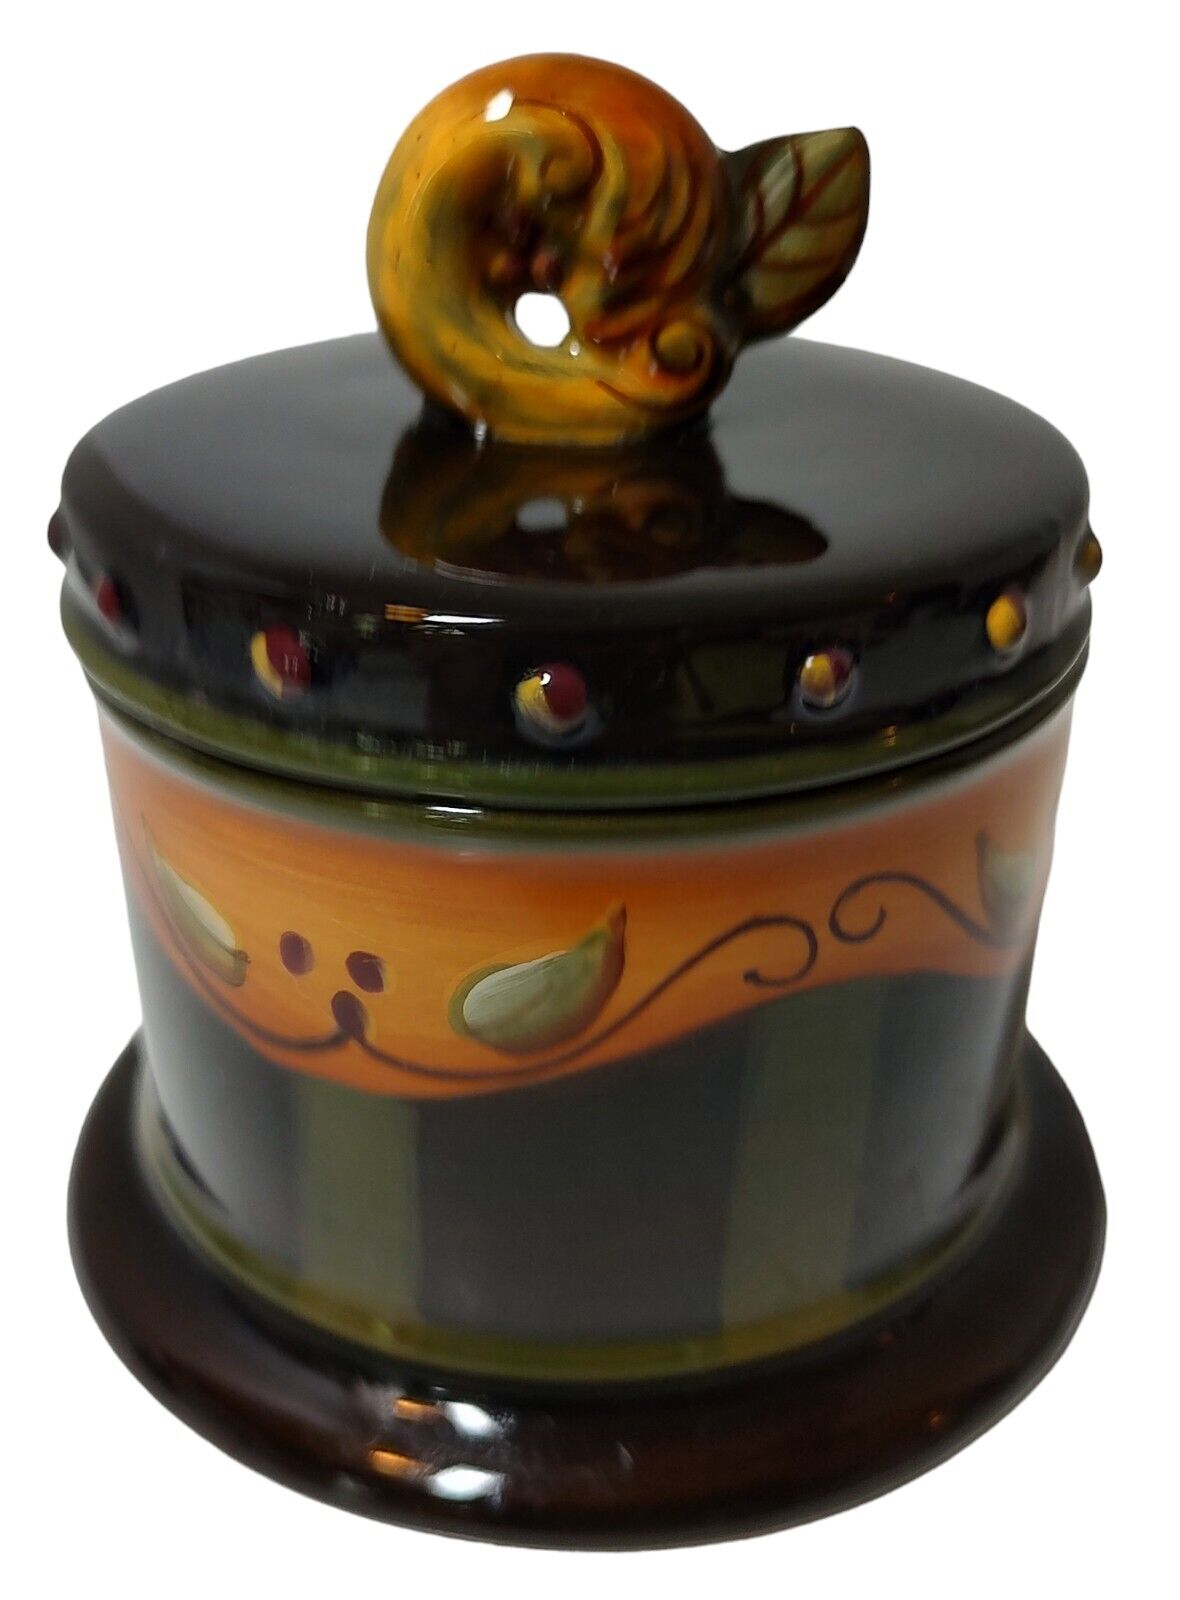 Demdaco Chocolate Berries Hand Painted Small Canister Deb Hrabik 2002 5 Inches